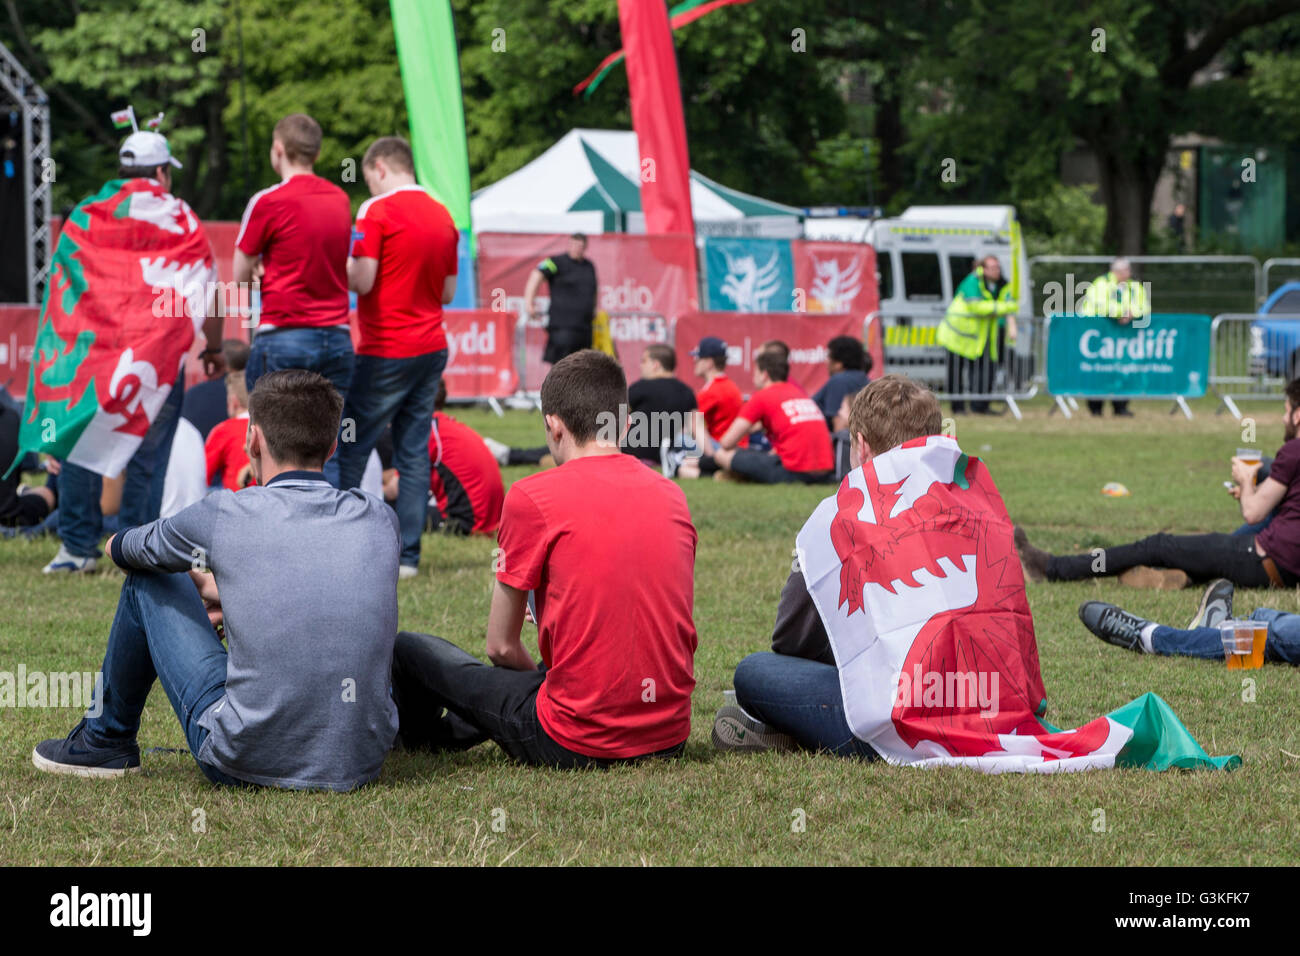 Wales fans at the fan zone in Cardiff ahead of the UEFA Euro 2016 match between Wales and Slovakia.  Mark H Stock Photo